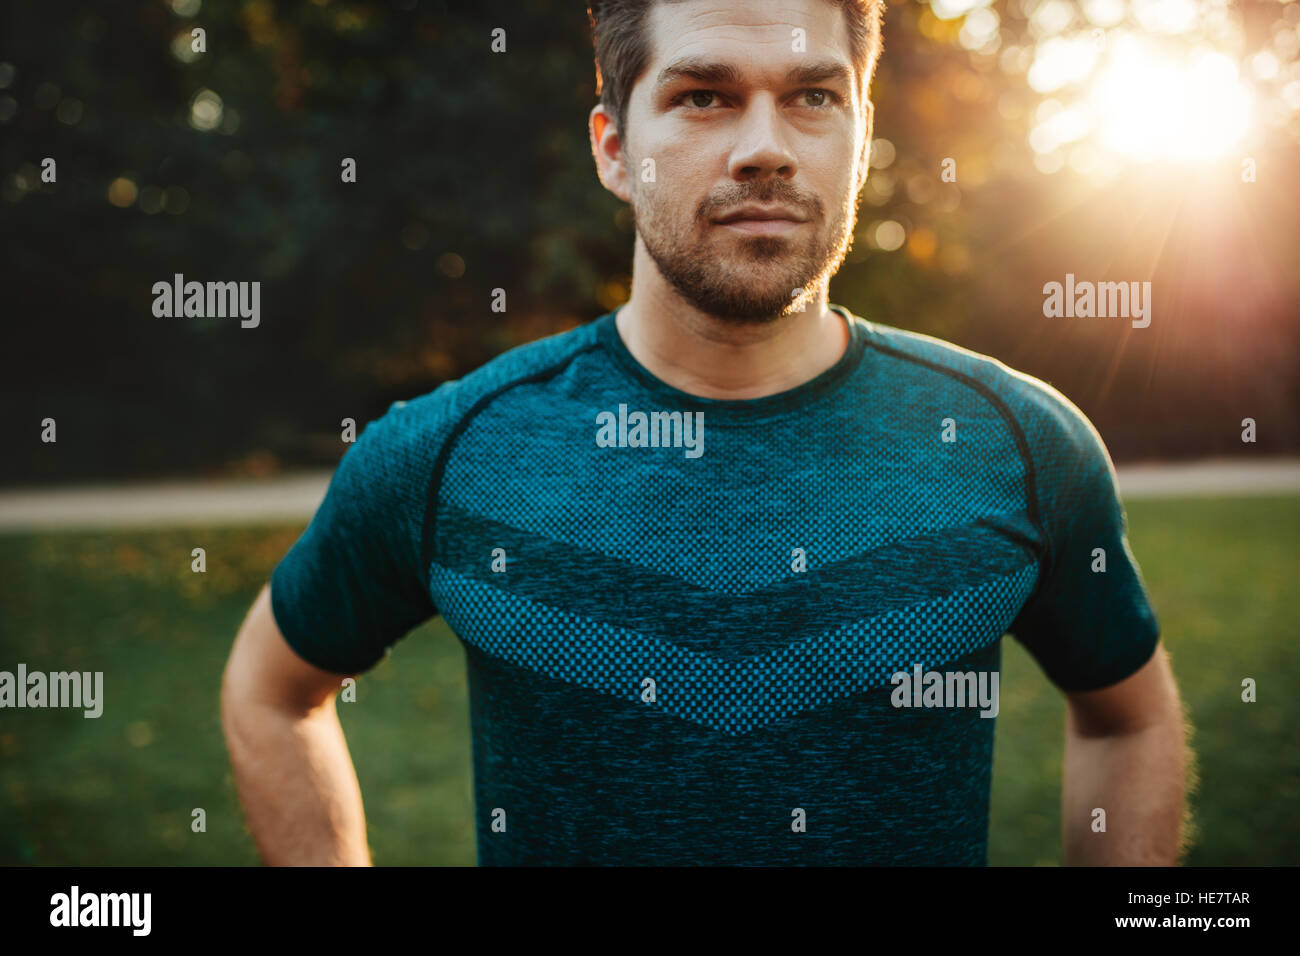 Close up portrait of fit young man in sportswear standing outdoors. Confident fitness male model in park. Stock Photo